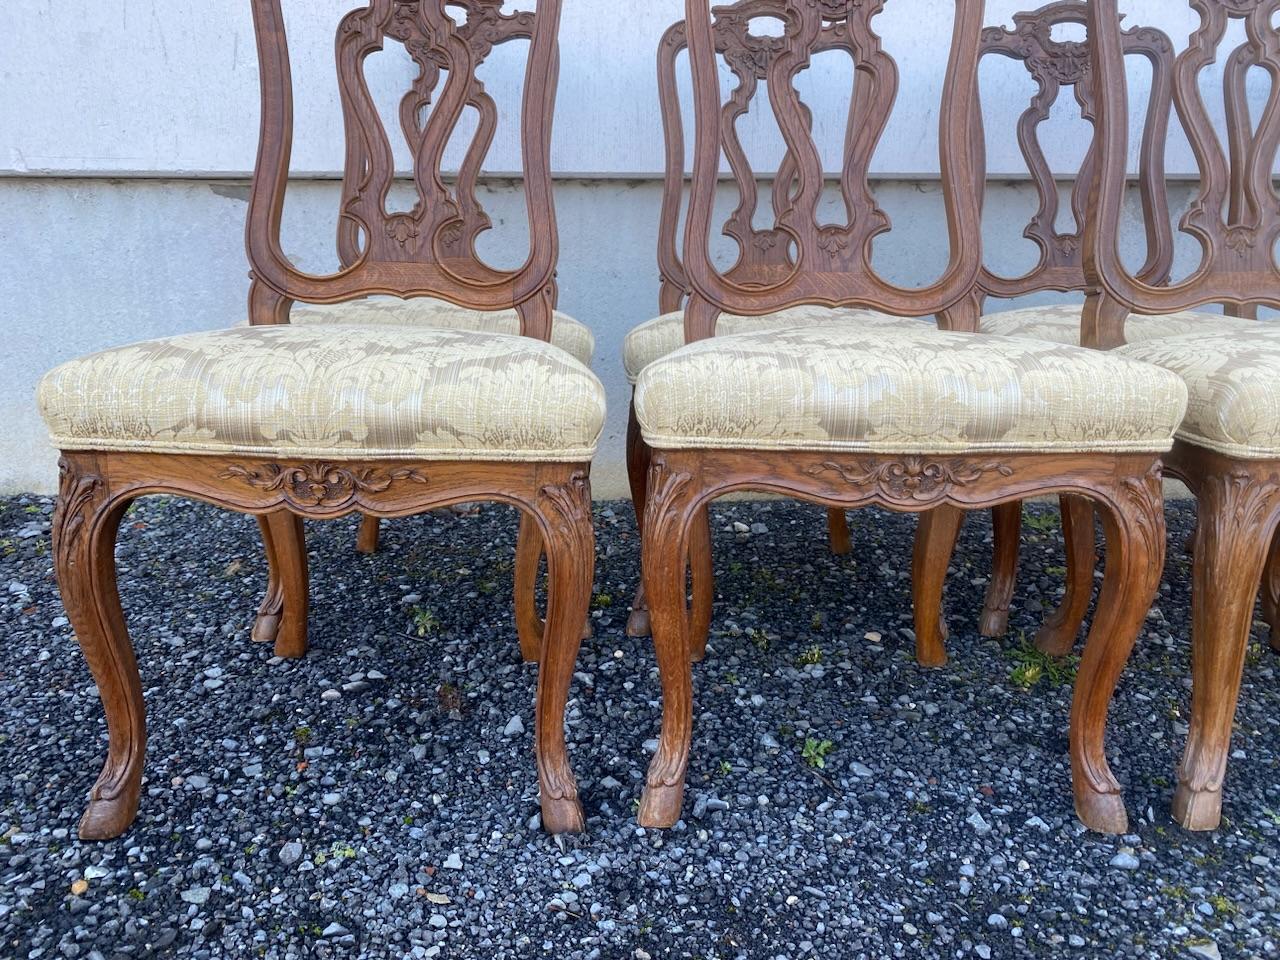 A really nice and very good quality set of 8 dining chairs. Originating from France and dating to around 1900. They are all strong and sturdy and the upholstery is in pretty good condition with just a few stains but the internal sprung upholstery is